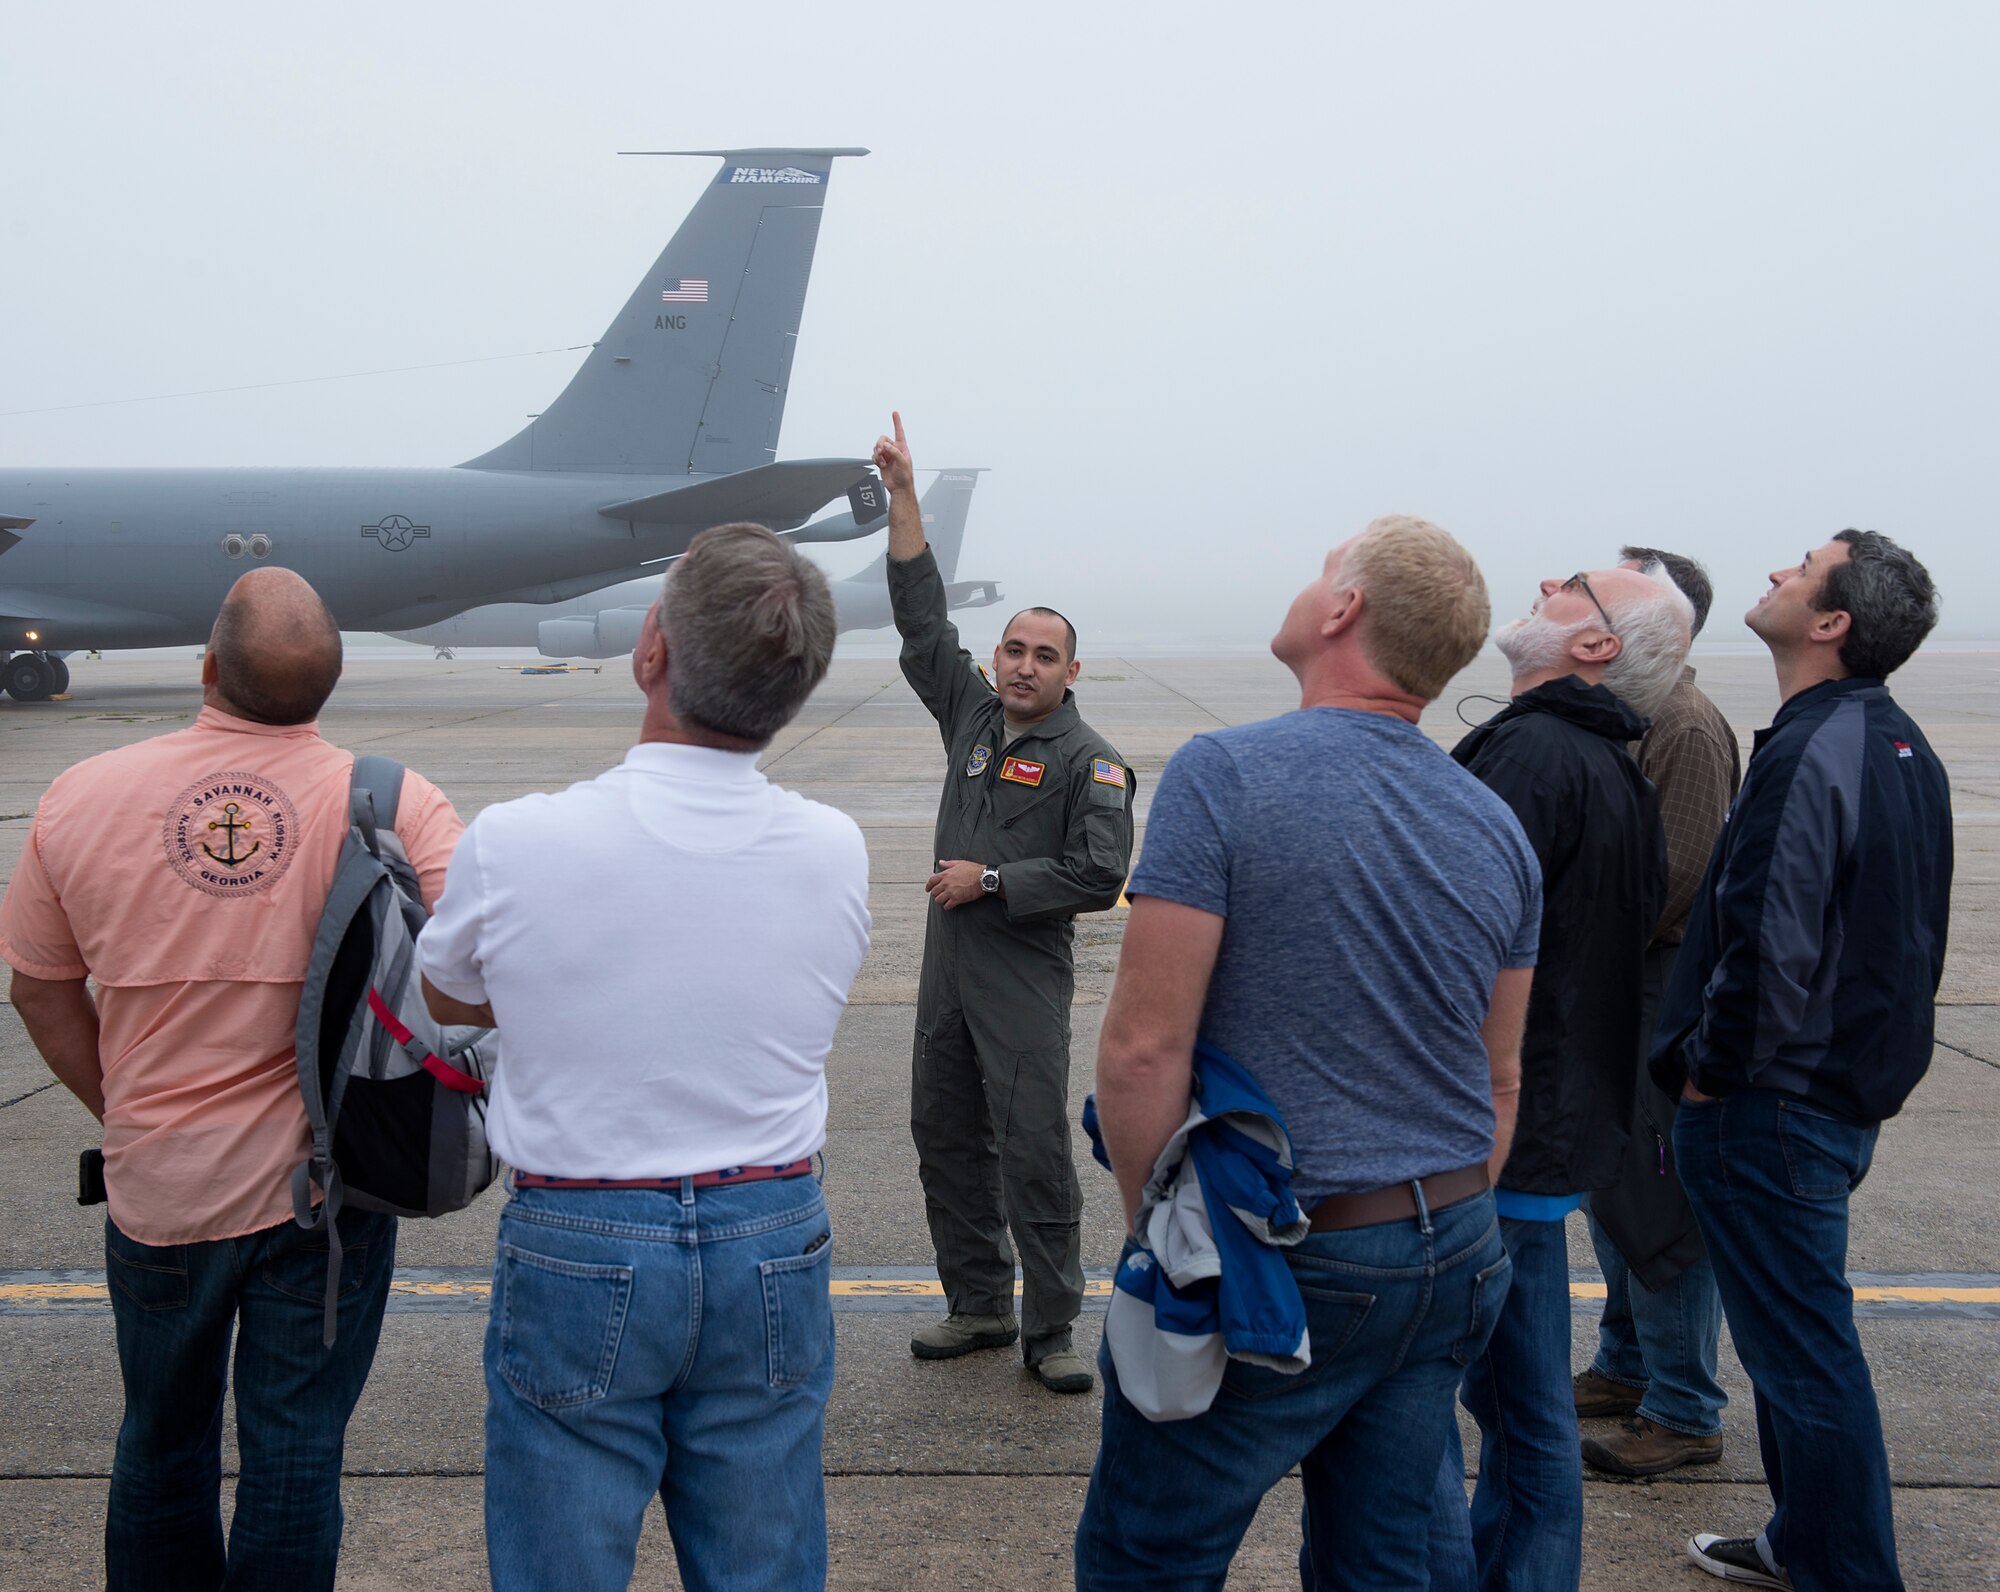 Staff Sgt. Hector M. Acevedo II, a 64th Air Refueling Squadron boom operator, gives local employers a tour of a KC-135 Stratotanker on Aug. 14, 2018 at Pease Air National Guard Base, N.H. The tour preceded a trip to Camp Grayling, Michigan where their employees, soldiers assigned to the 197th Field Artillery Brigade, N.H. Army National Guard, conducted their annual training. (Photo by Staff Sgt. Kayla White, 157th Air Refueling Wing Public Affairs)